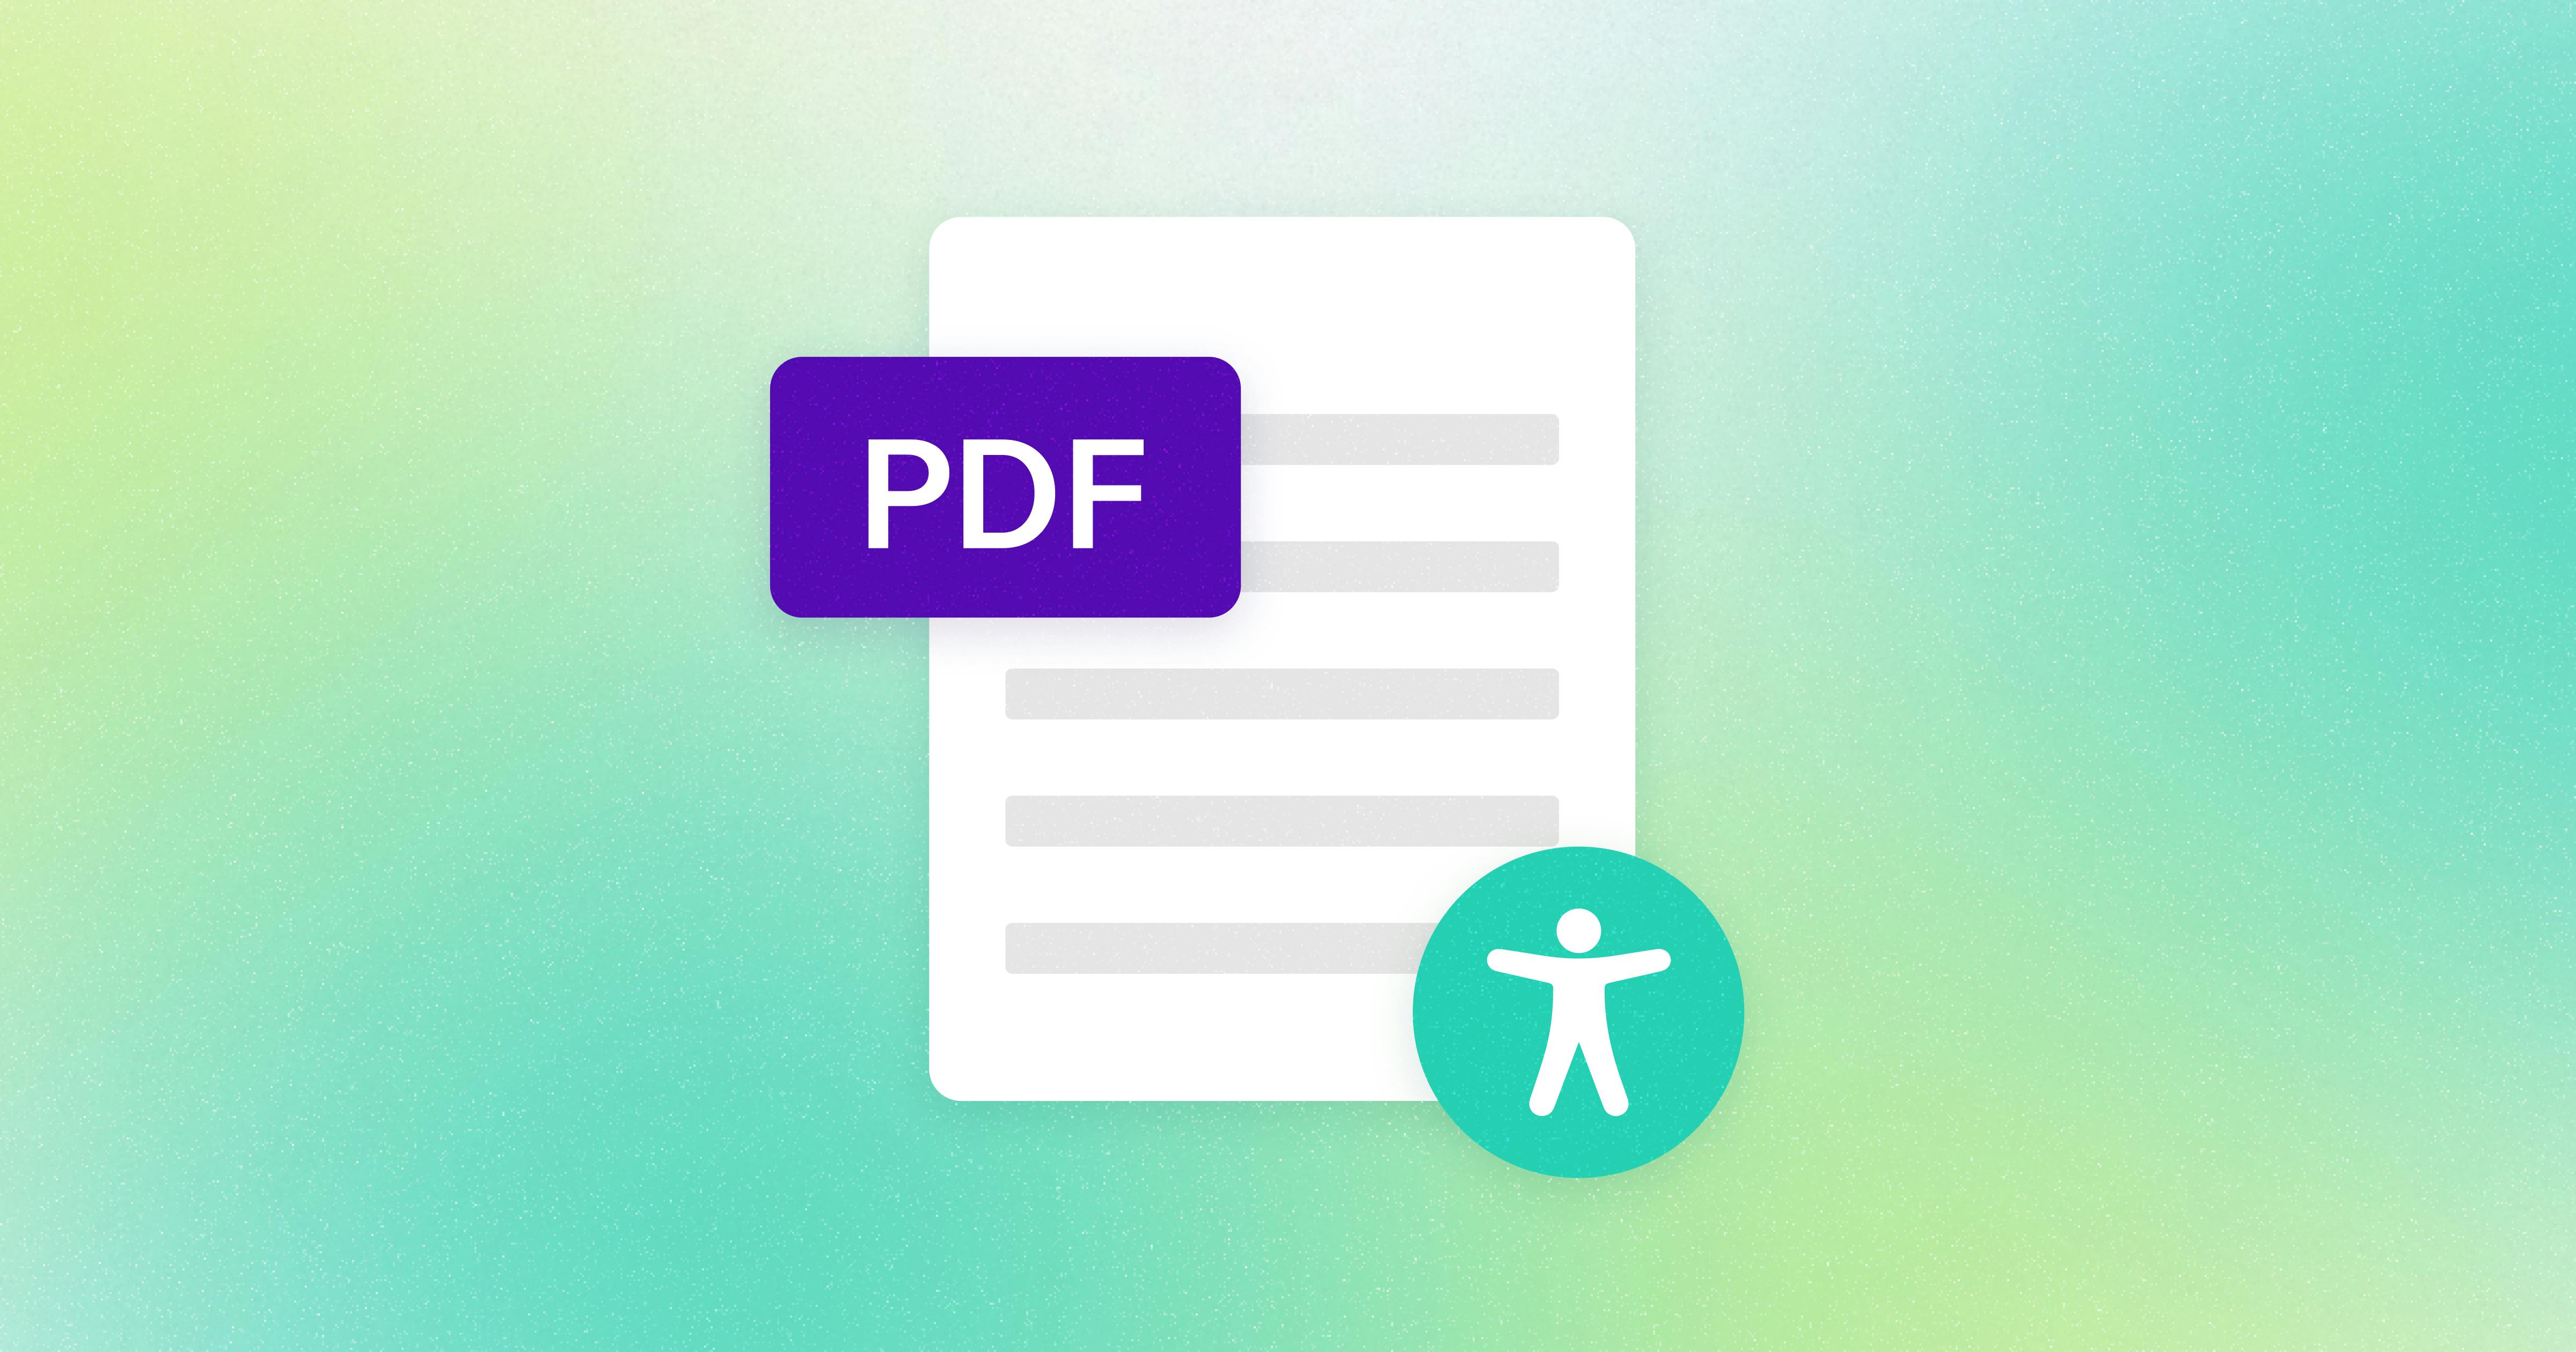 Document labeled PDF with the AudioEye icon in the bottom right corner